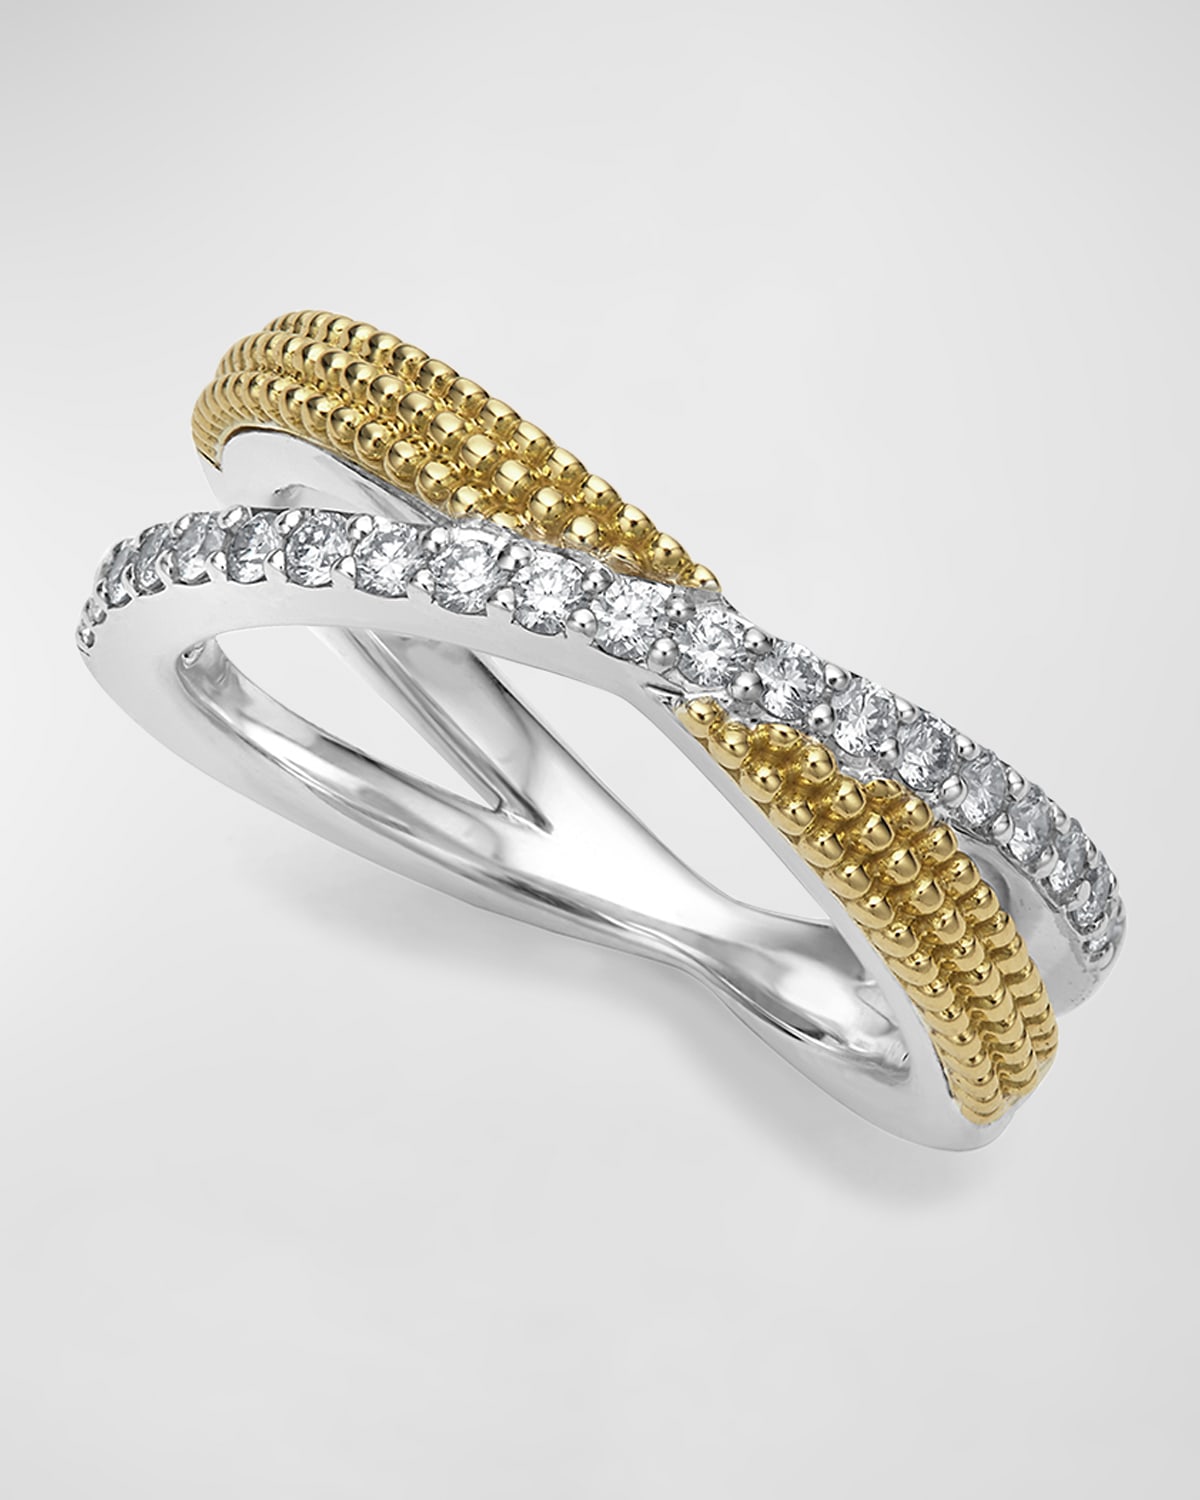 LAGOS STERLING SILVER & 18K YELLOW GOLD CAVIAR X RING